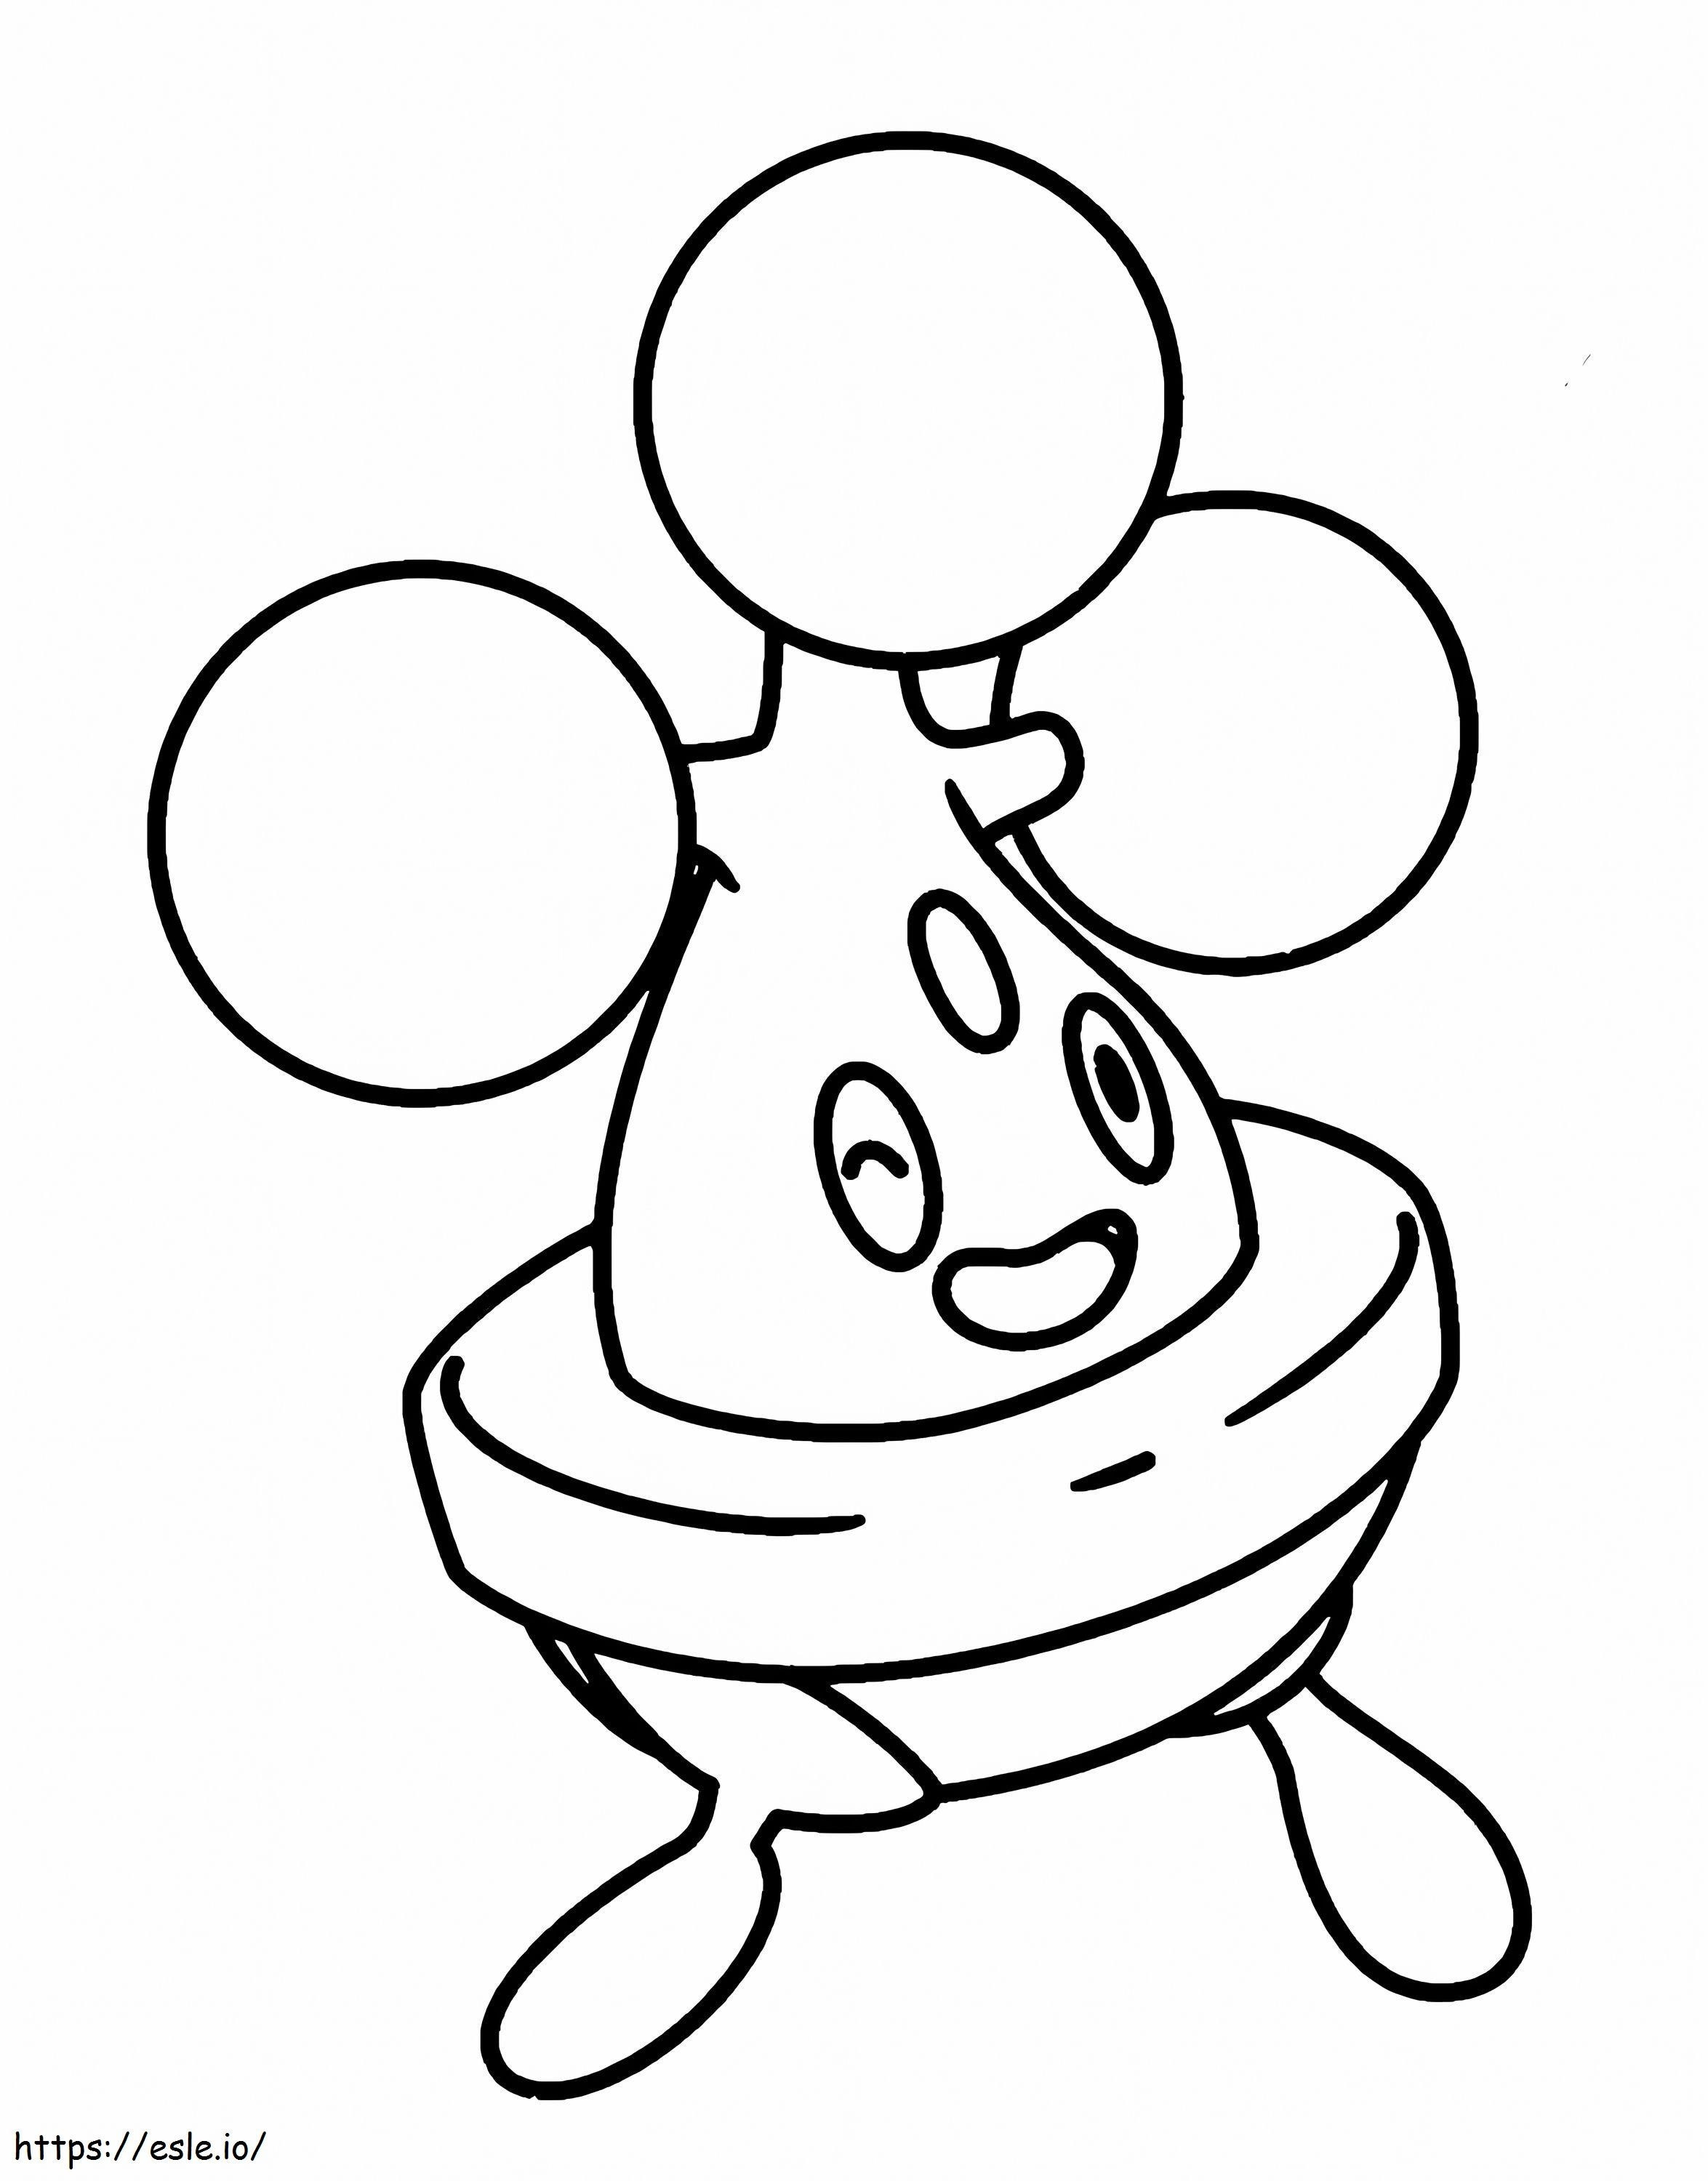 Bonsly Pokemon 3 coloring page